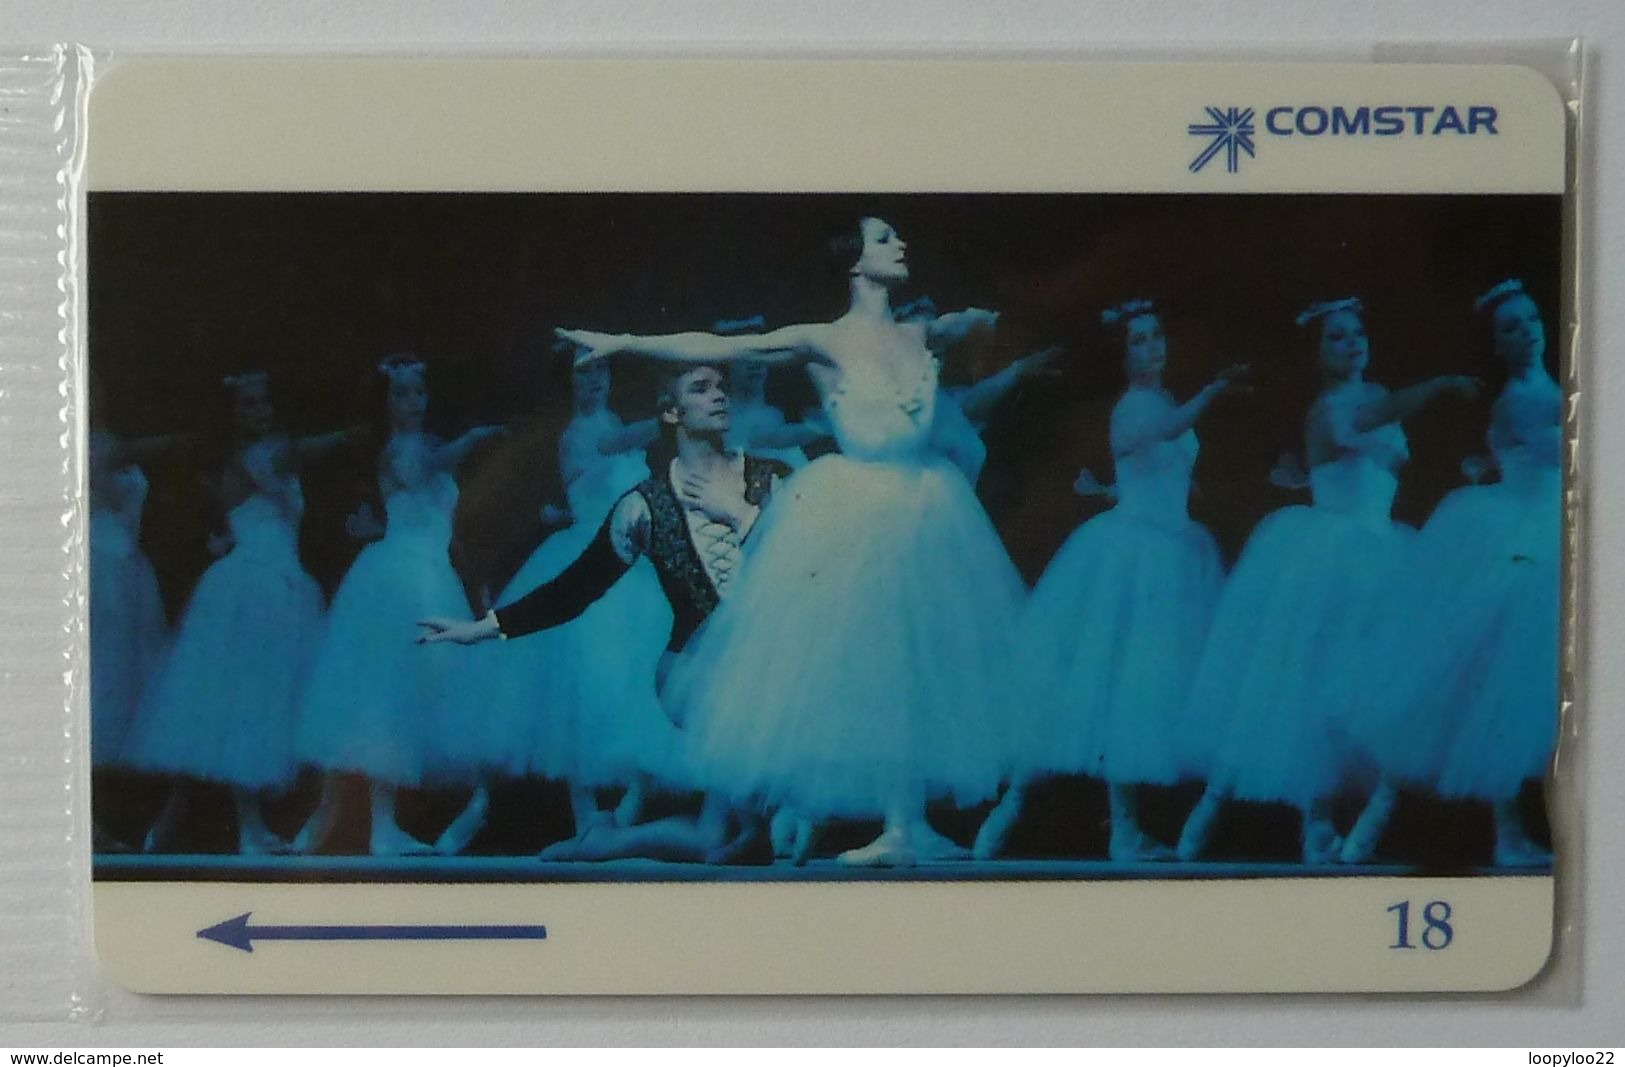 RUSSIA / USSR - GPT - Moscow - Comstar - Bolshoi Ballet 3  - Giselle - $18 - 8SSRH - Mint Blister - Russia